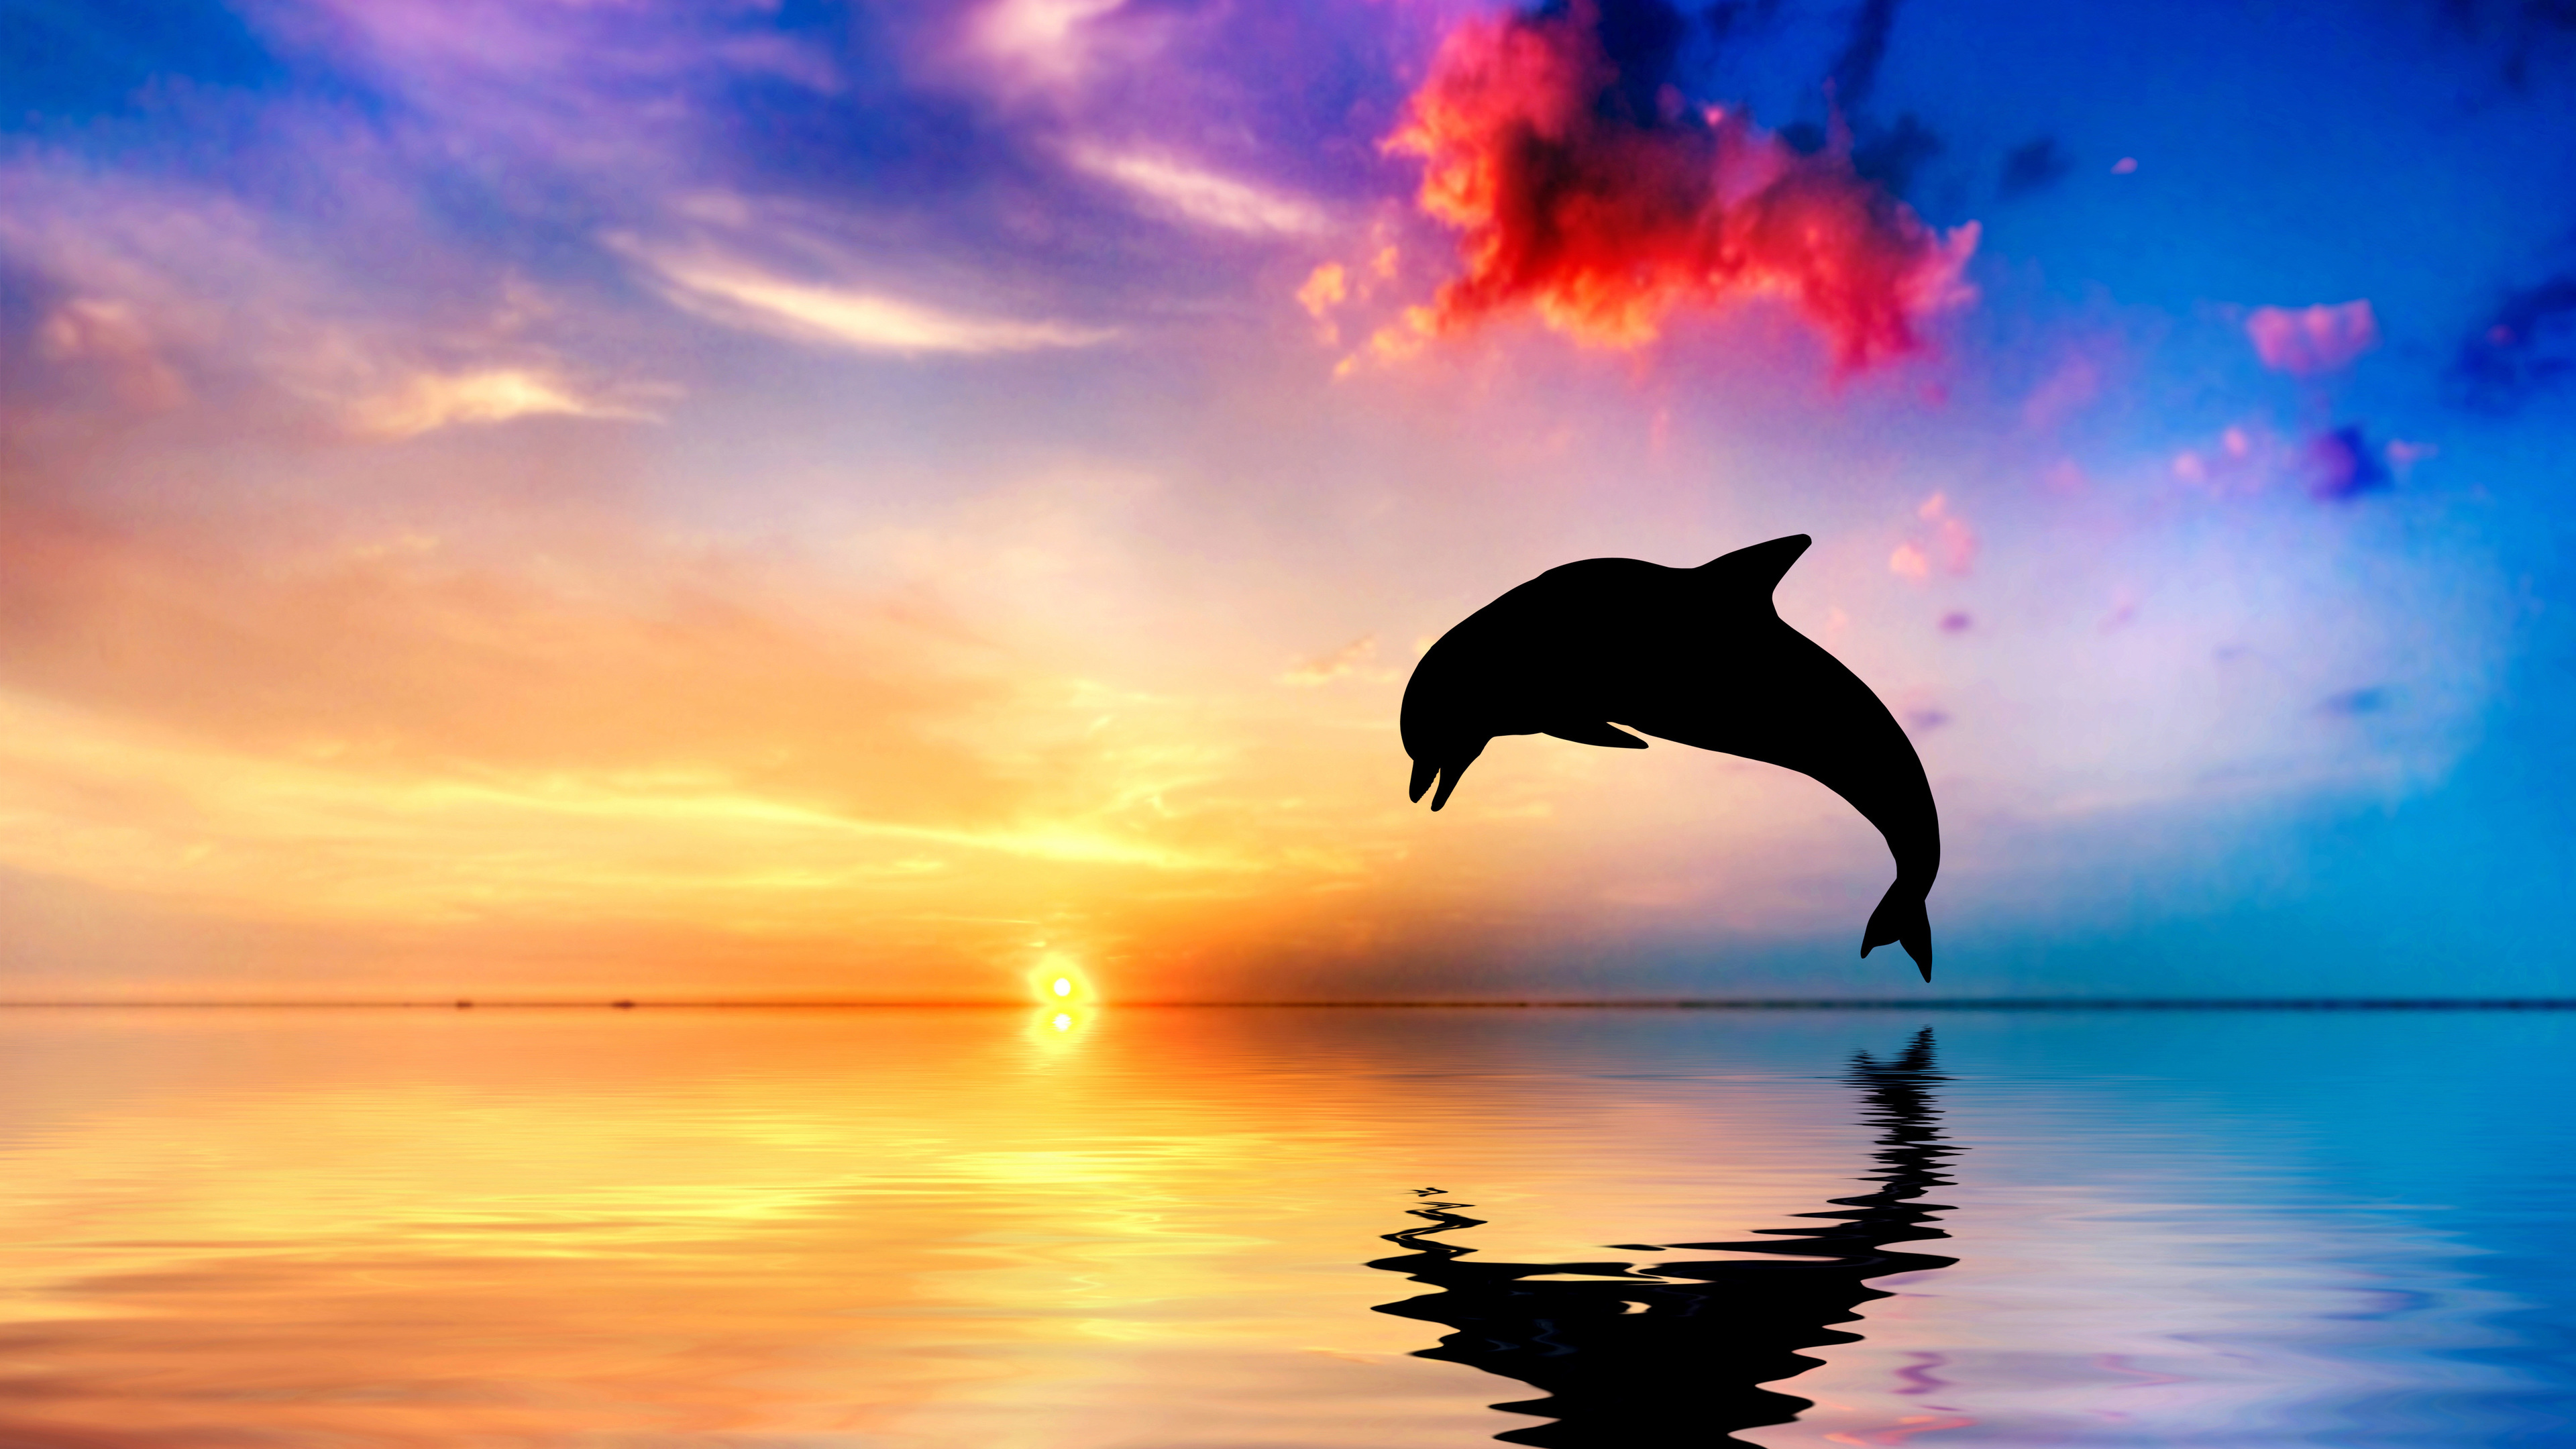 Dolphin Jumping Out Of Water Sunset View 4k - Beautiful Ocean And Sunset With Dolphin Jumping - HD Wallpaper 